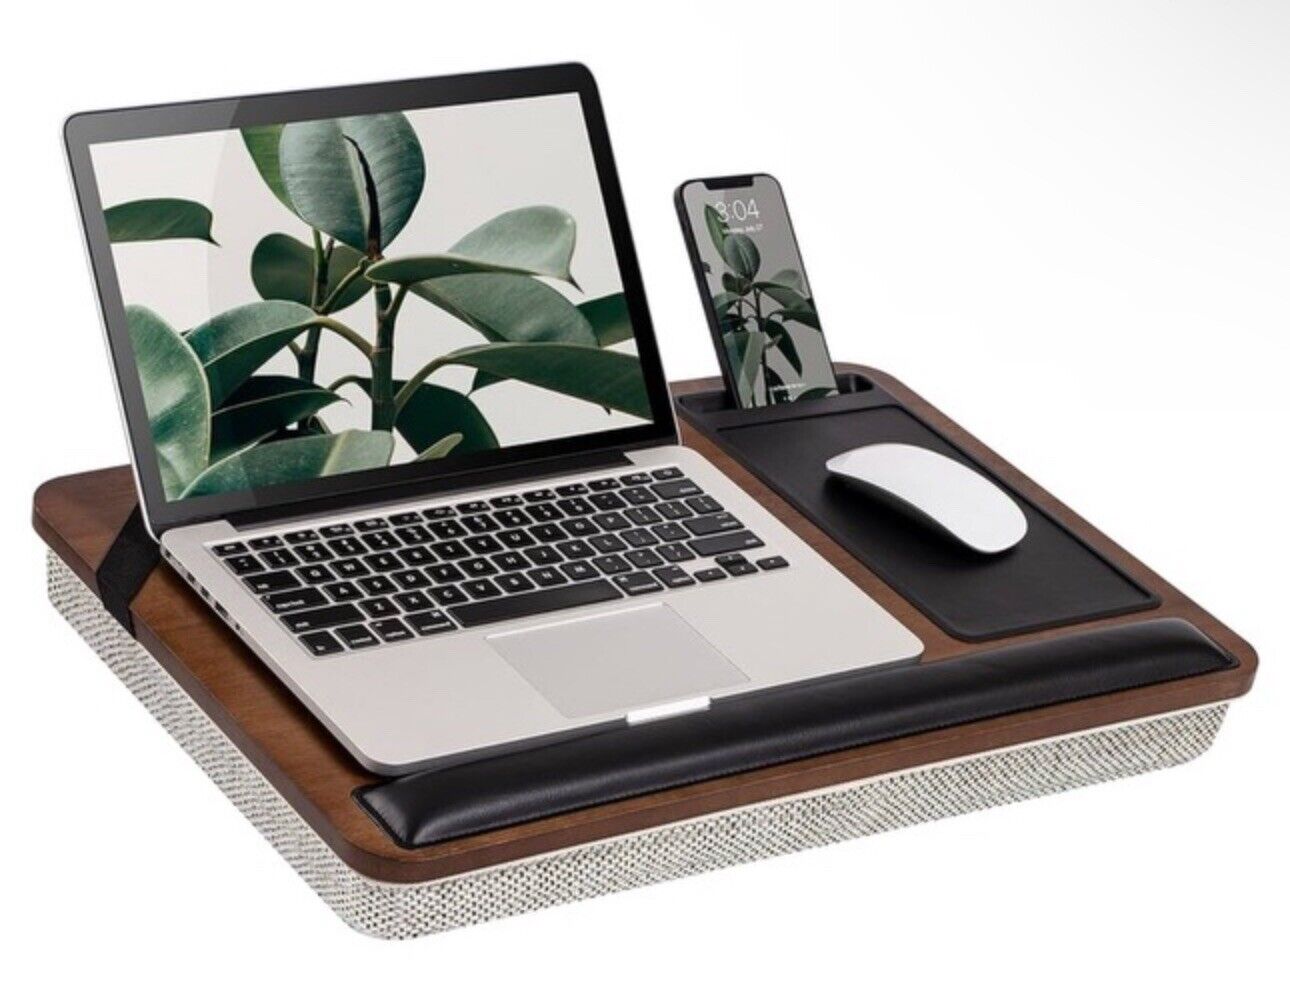 Rossie Home Real Acacia Wood Lap Desk Wrist Rest, Mouse Pad, Phone Holder